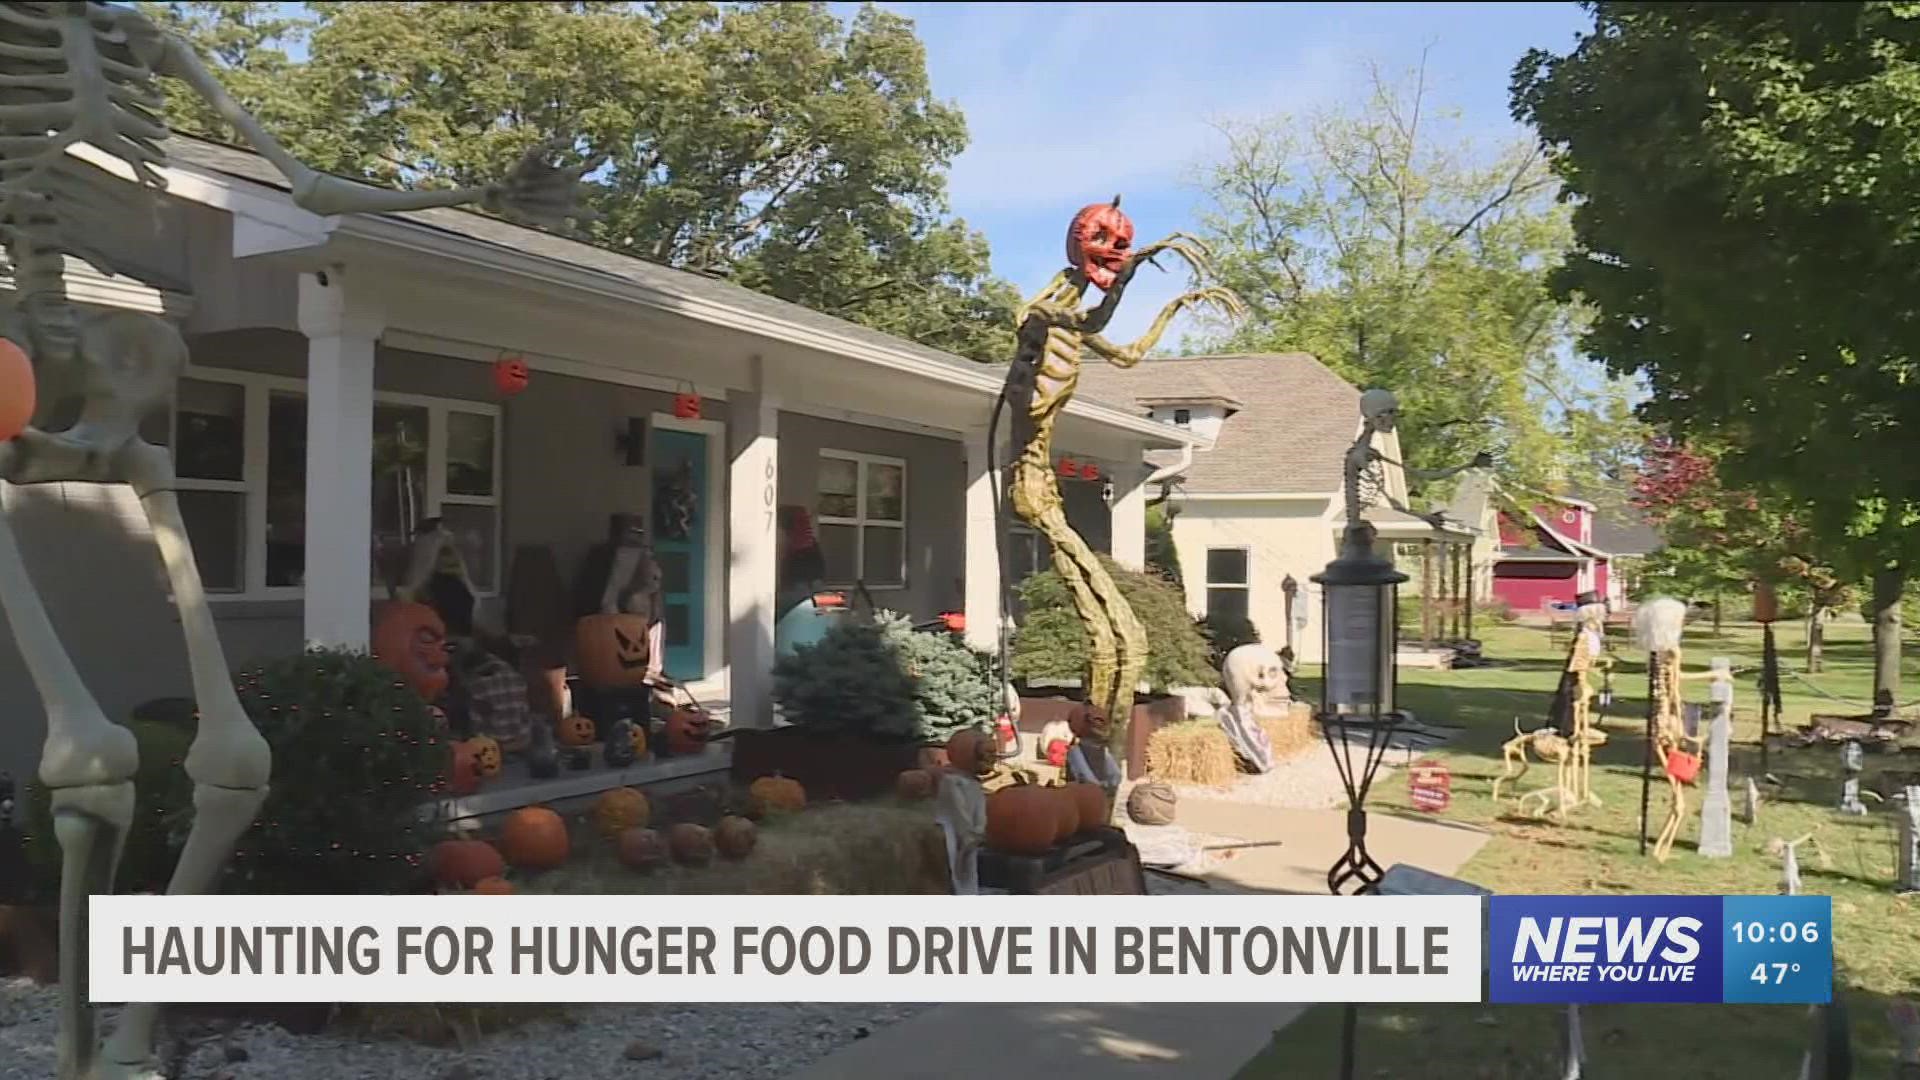 A Bentonville couple is using their large Halloween display to encourage people to donate to fight food insecurity.